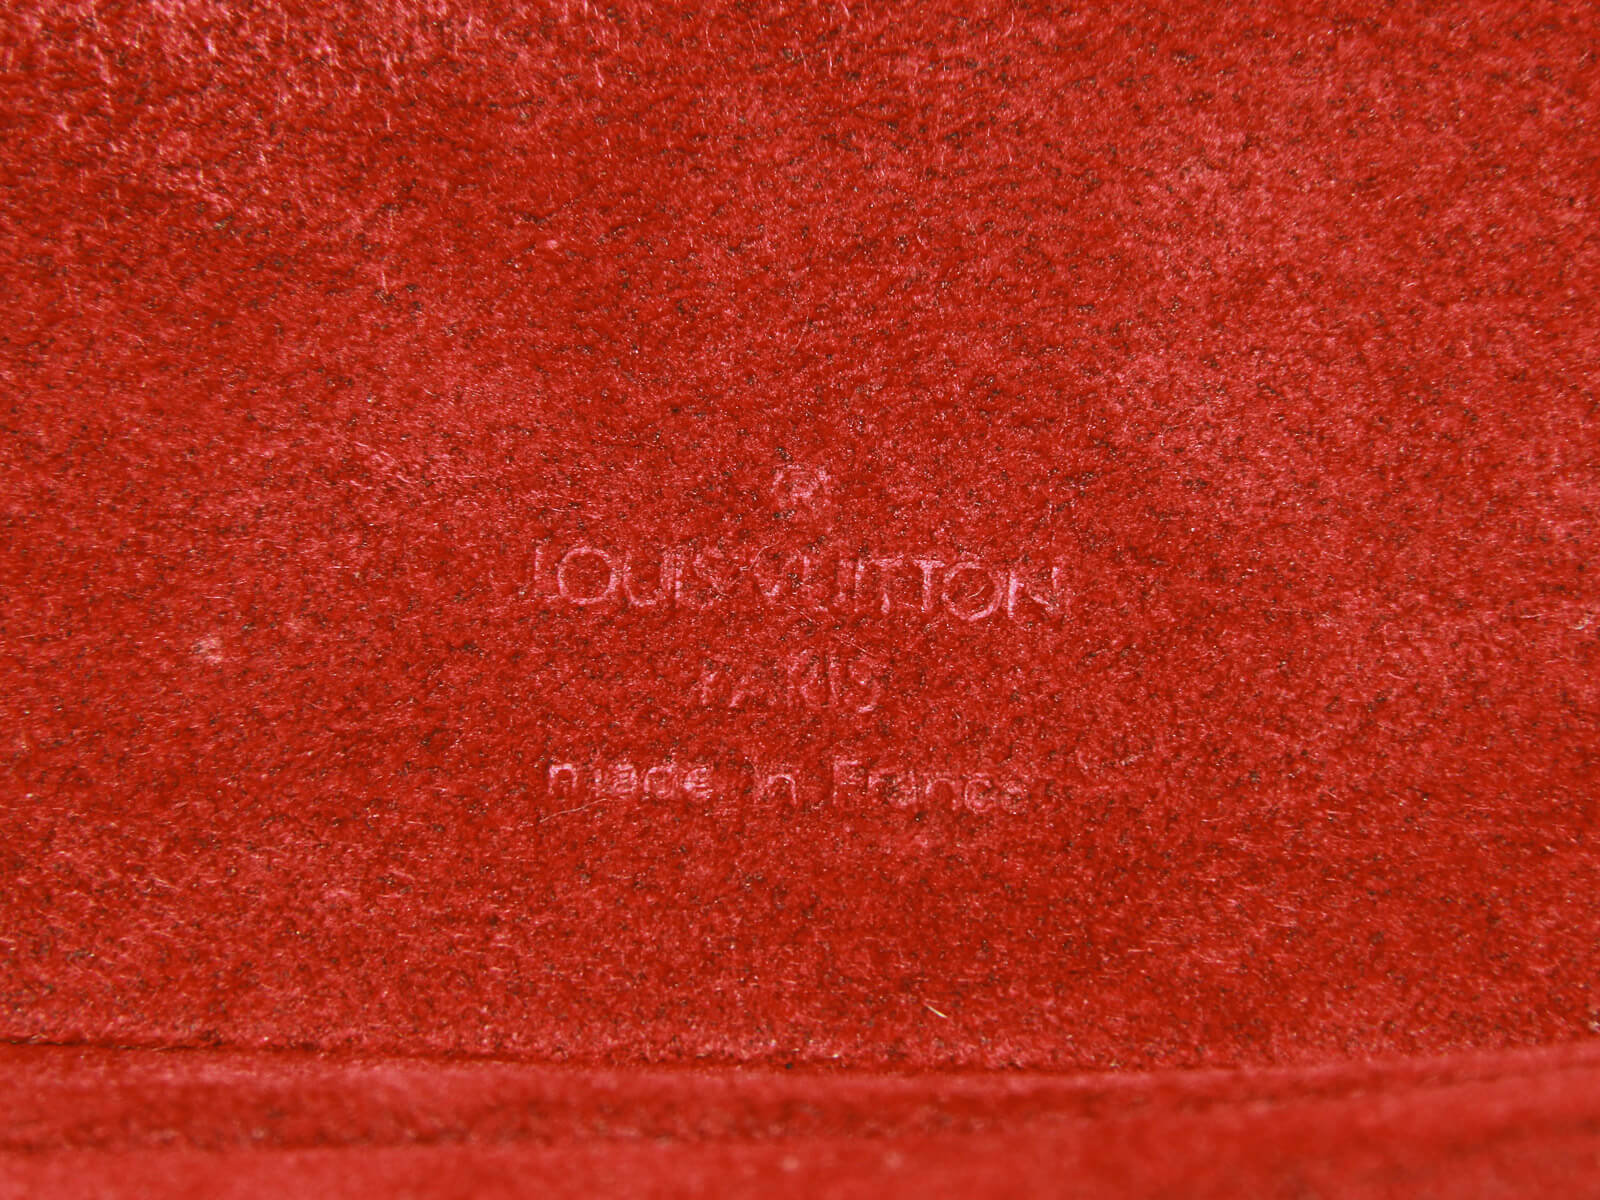 Louis Vuitton Red Epi Leather Cannes Vanity Bag (Authentic Pre-Owned) -  ShopStyle